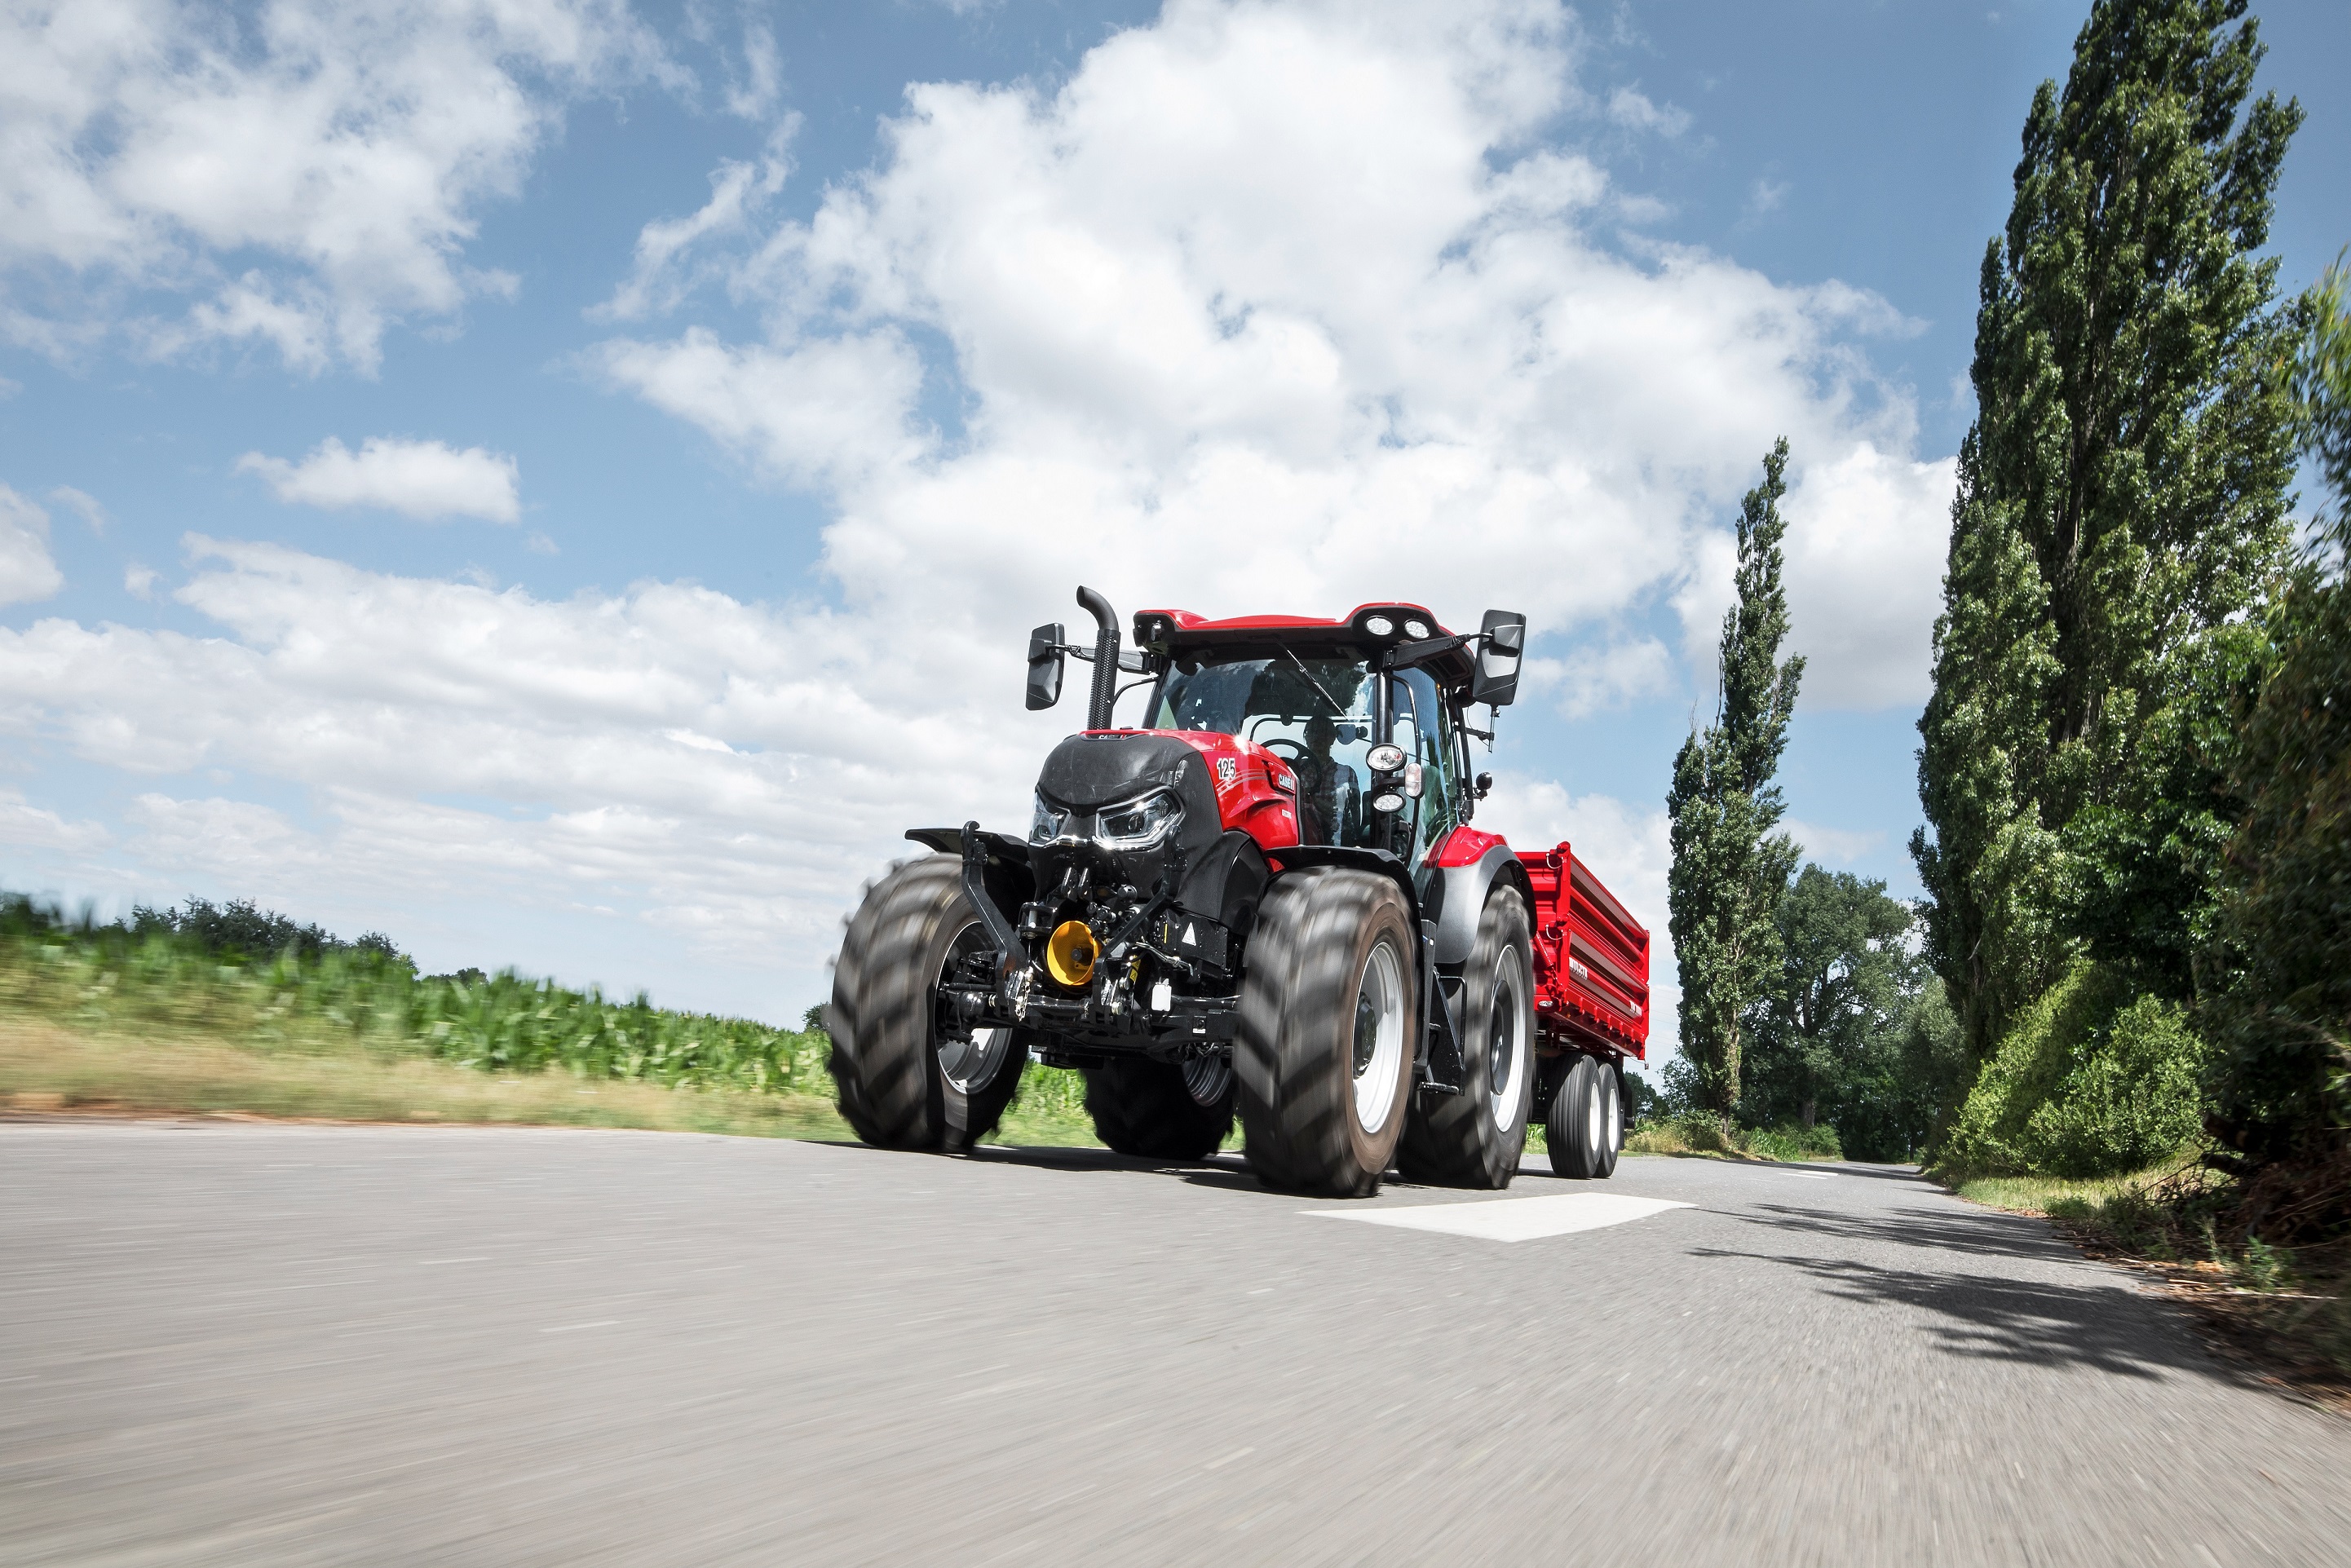 CASE IH WINS MACHINE OF THE YEAR 2018 TITLE WITH NEW MAXXUM MULTICONTROLLER WITH ACTIVEDRIVE 8 TRANSMISSION